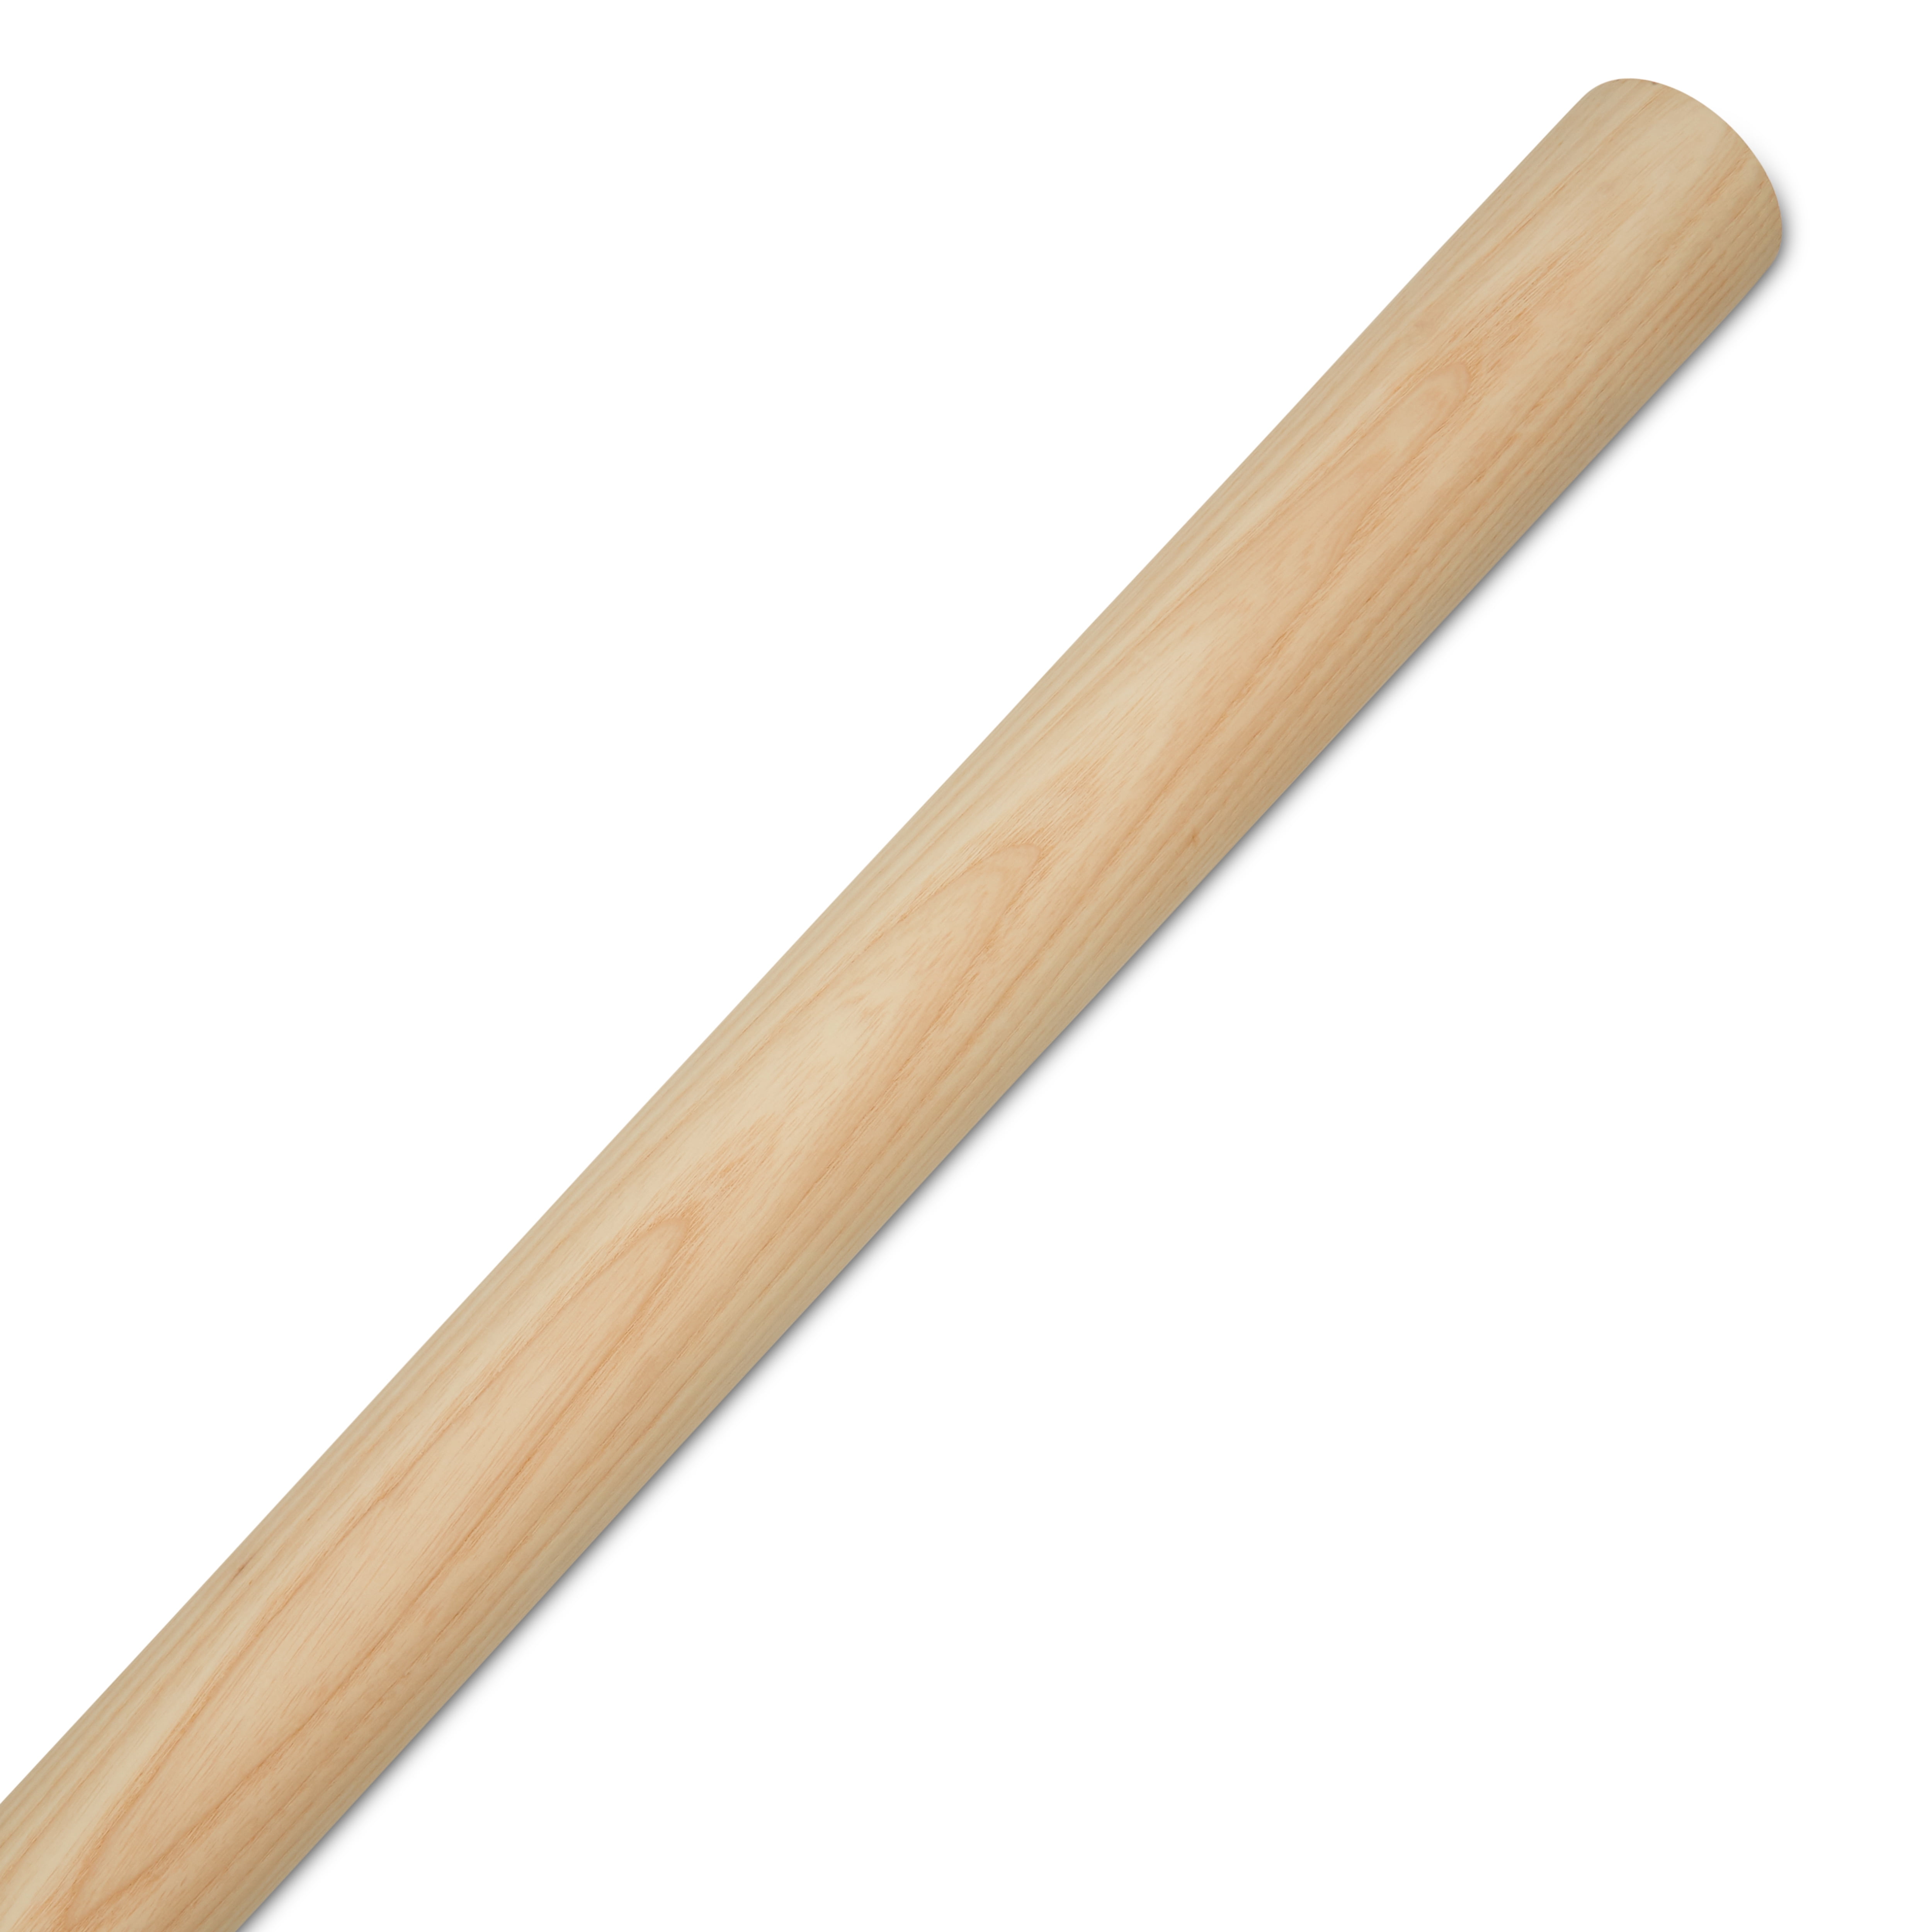 Dowel Rods Wood Sticks Wooden Dowel Rods - 1/4 x 24 Inch Unfinished  Hardwood Sticks - for Crafts and DIYers - 25 Pieces by Woodpeckers